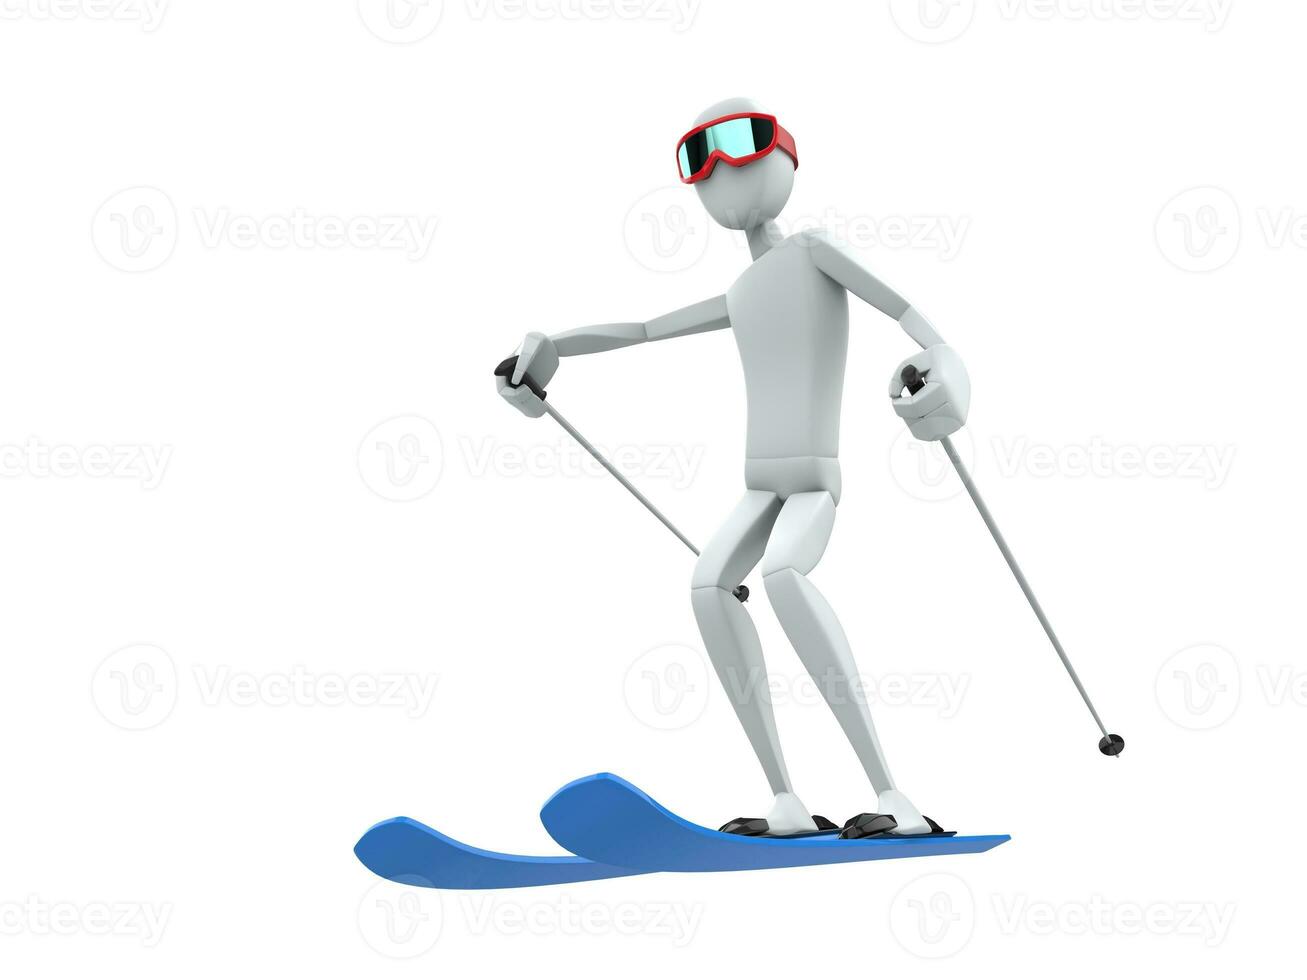 White skier character with red goggles and blue skis photo